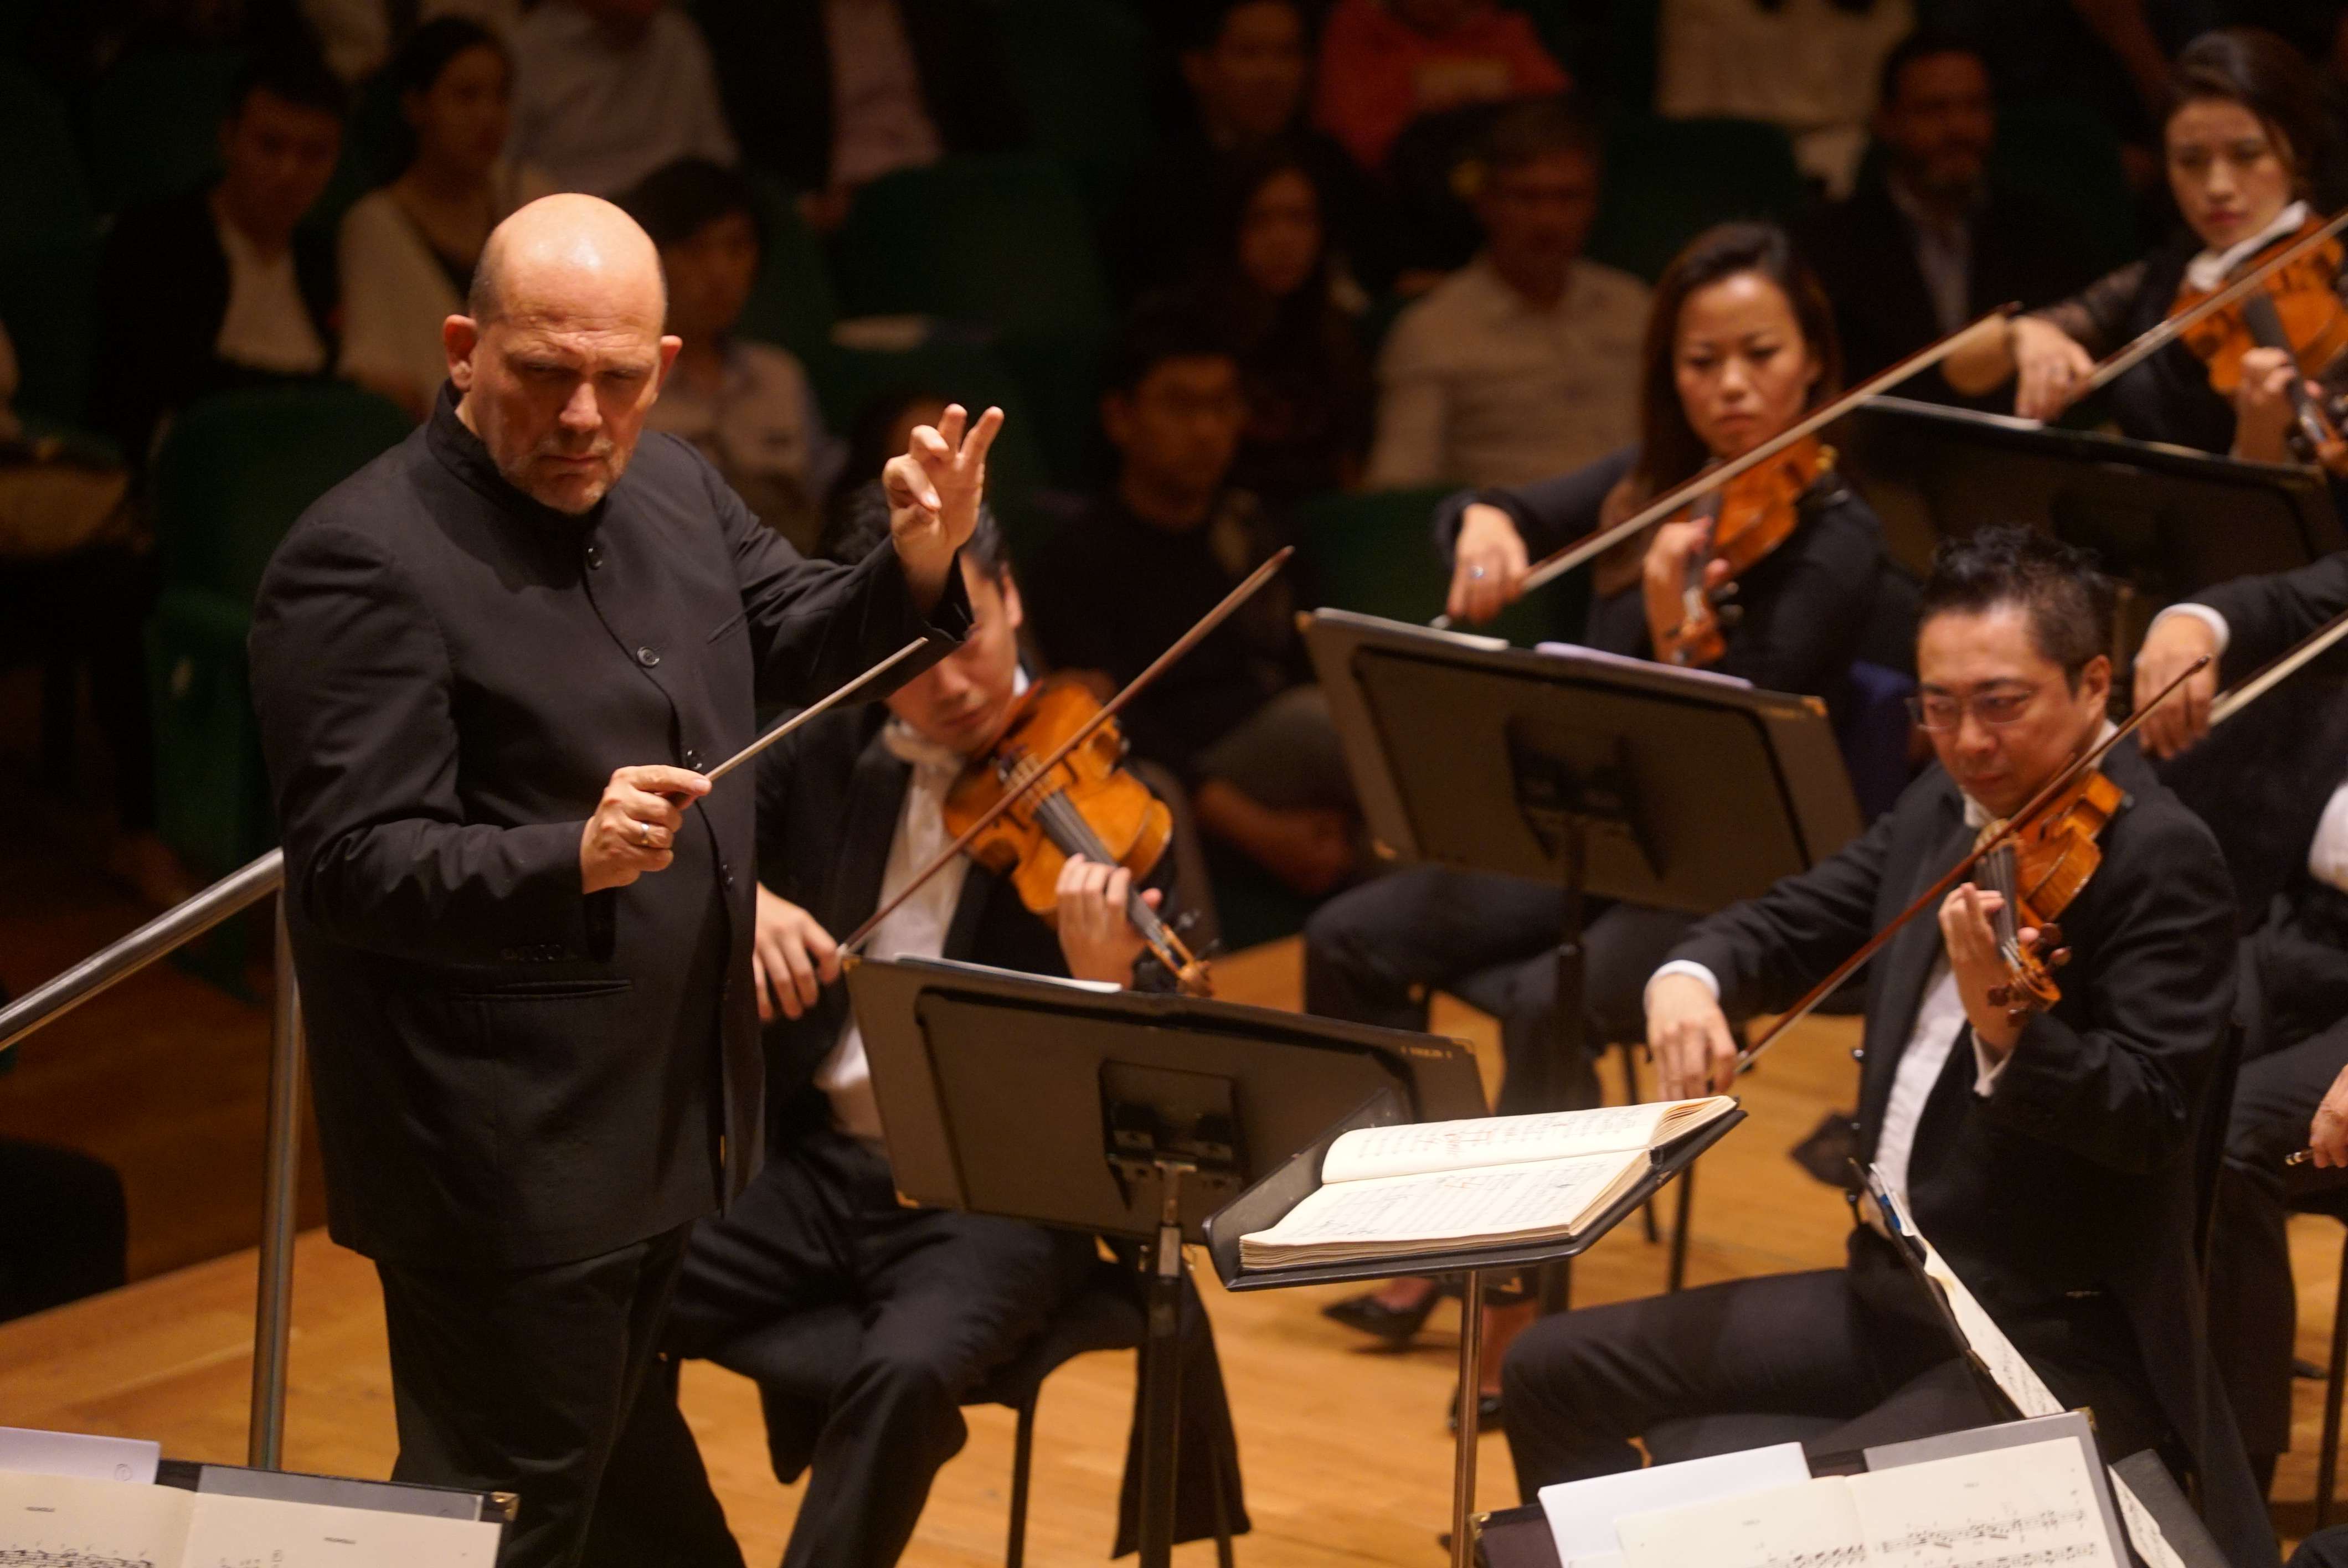 Jaap van Zweden’s recruitment to head the New York Philharmonic Orchestra, and the extension until 2022 of his contract as music director of the Hong Kong Philharmonic, was among the top arts stories of 2016 in Hong Kong. Photo: Cheung Wai Lok